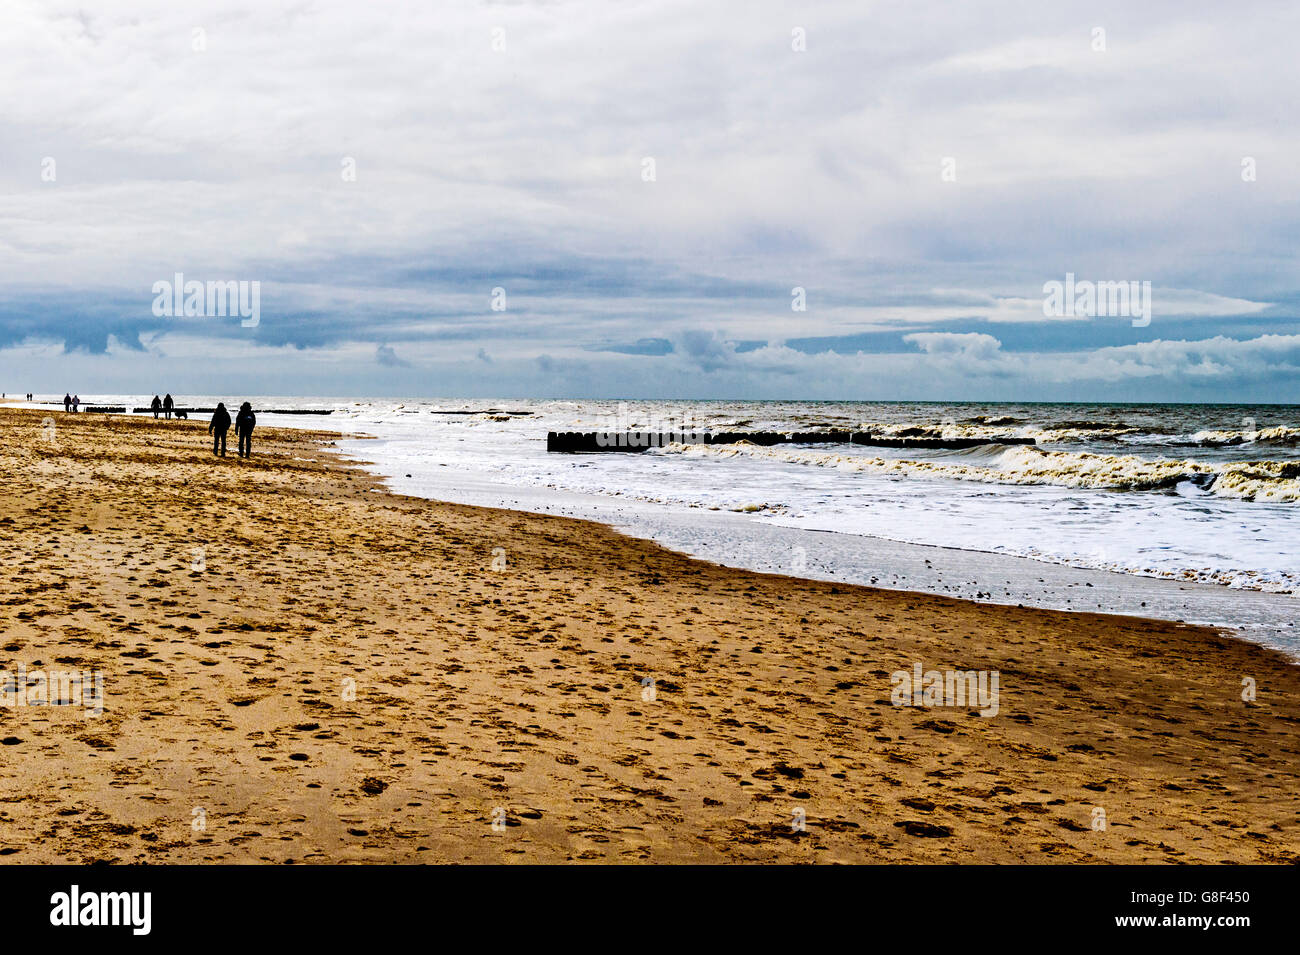 Beach on the isle of Sylt, northern Germany; am strand von Sylt Stock Photo